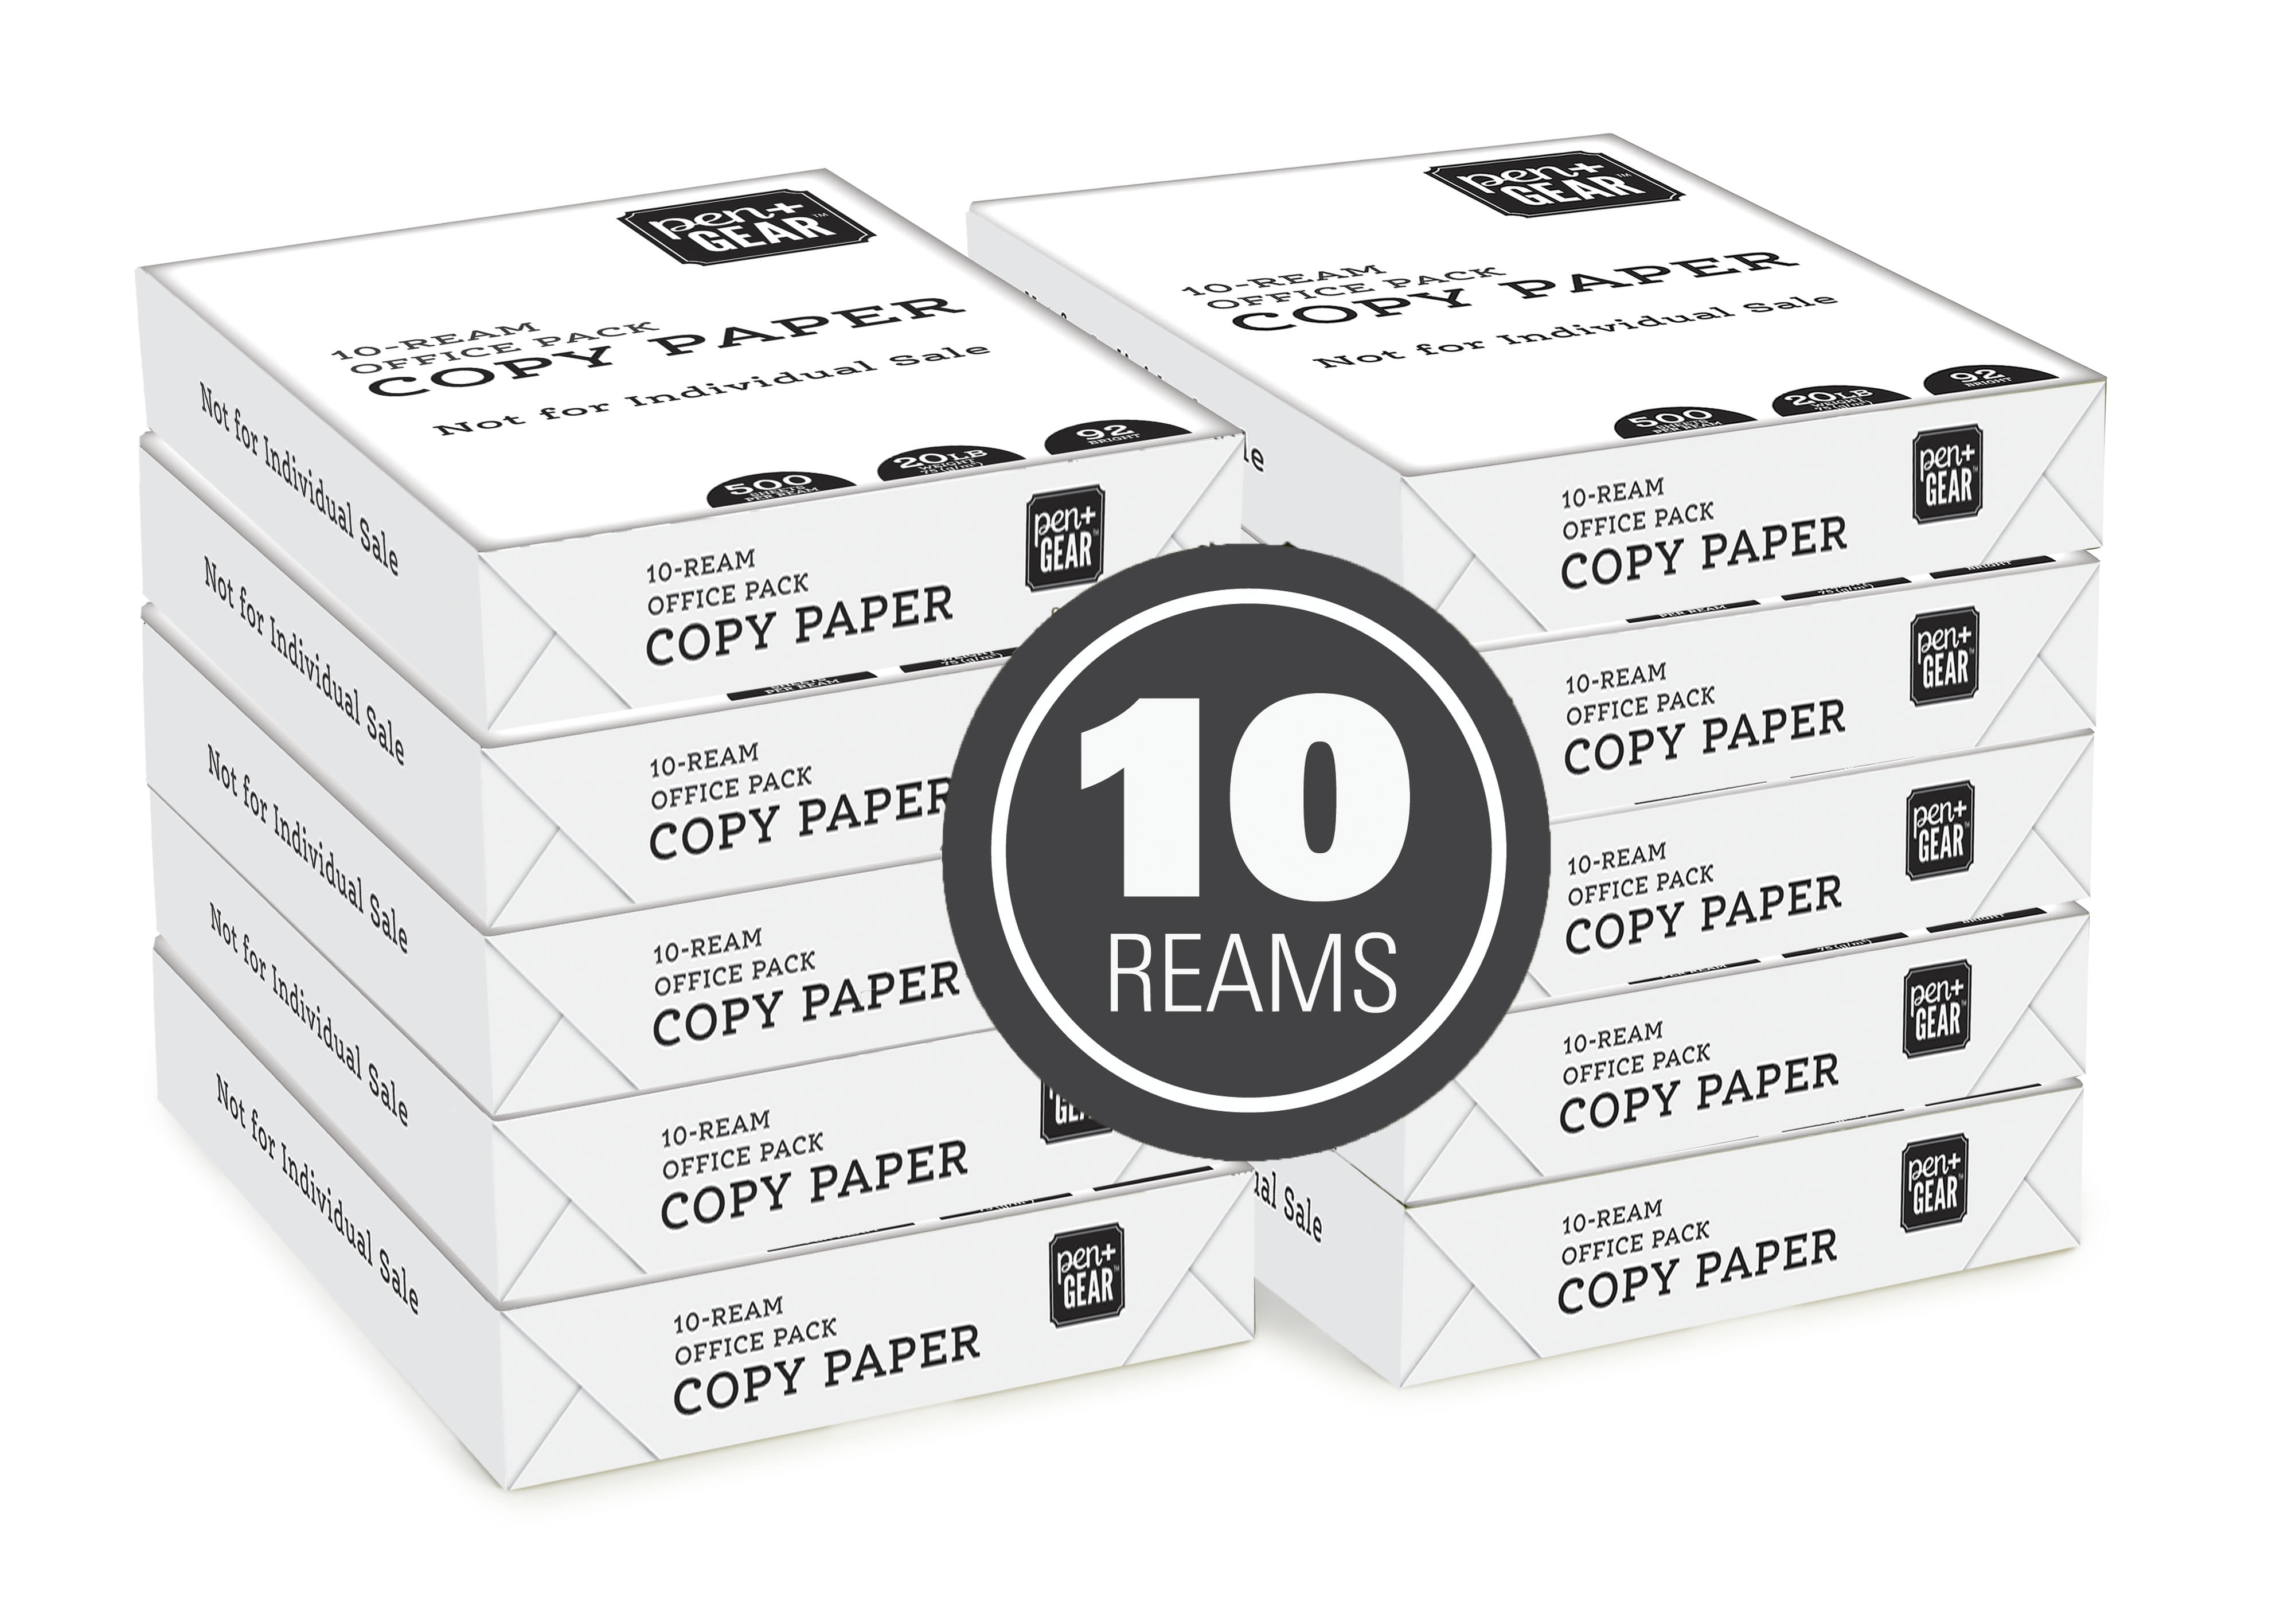 SKILCRAFT Color Xerographic Copier Paper Letter Size 8 12 x 11 5000 Total  Sheets Yellow 500 Sheets Per Ream Case Of 10 Reams AbilityOne 7530 01 147  6811 - Office Depot